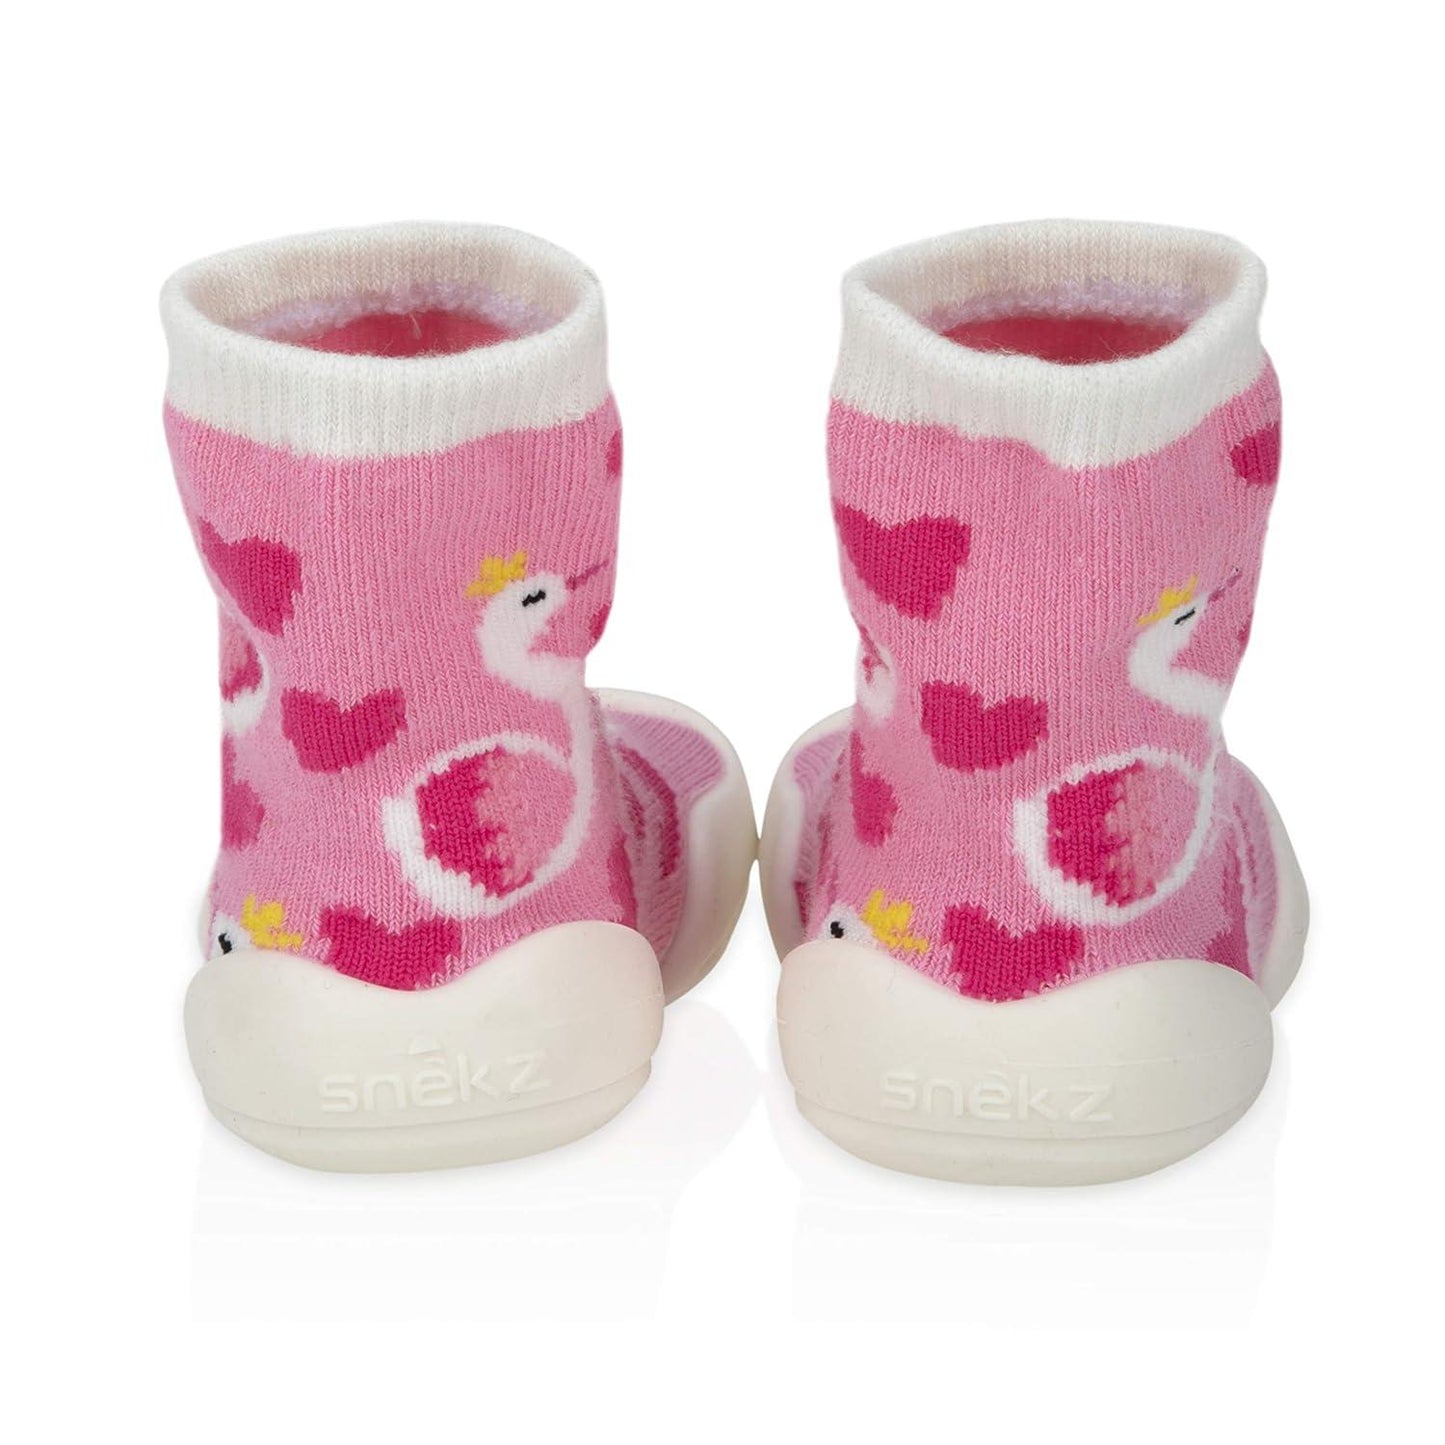 Nuby Snekz Comfortable Rubber Sole Sock Shoes for First Steps- Pink Swan/Large 14-22 Months